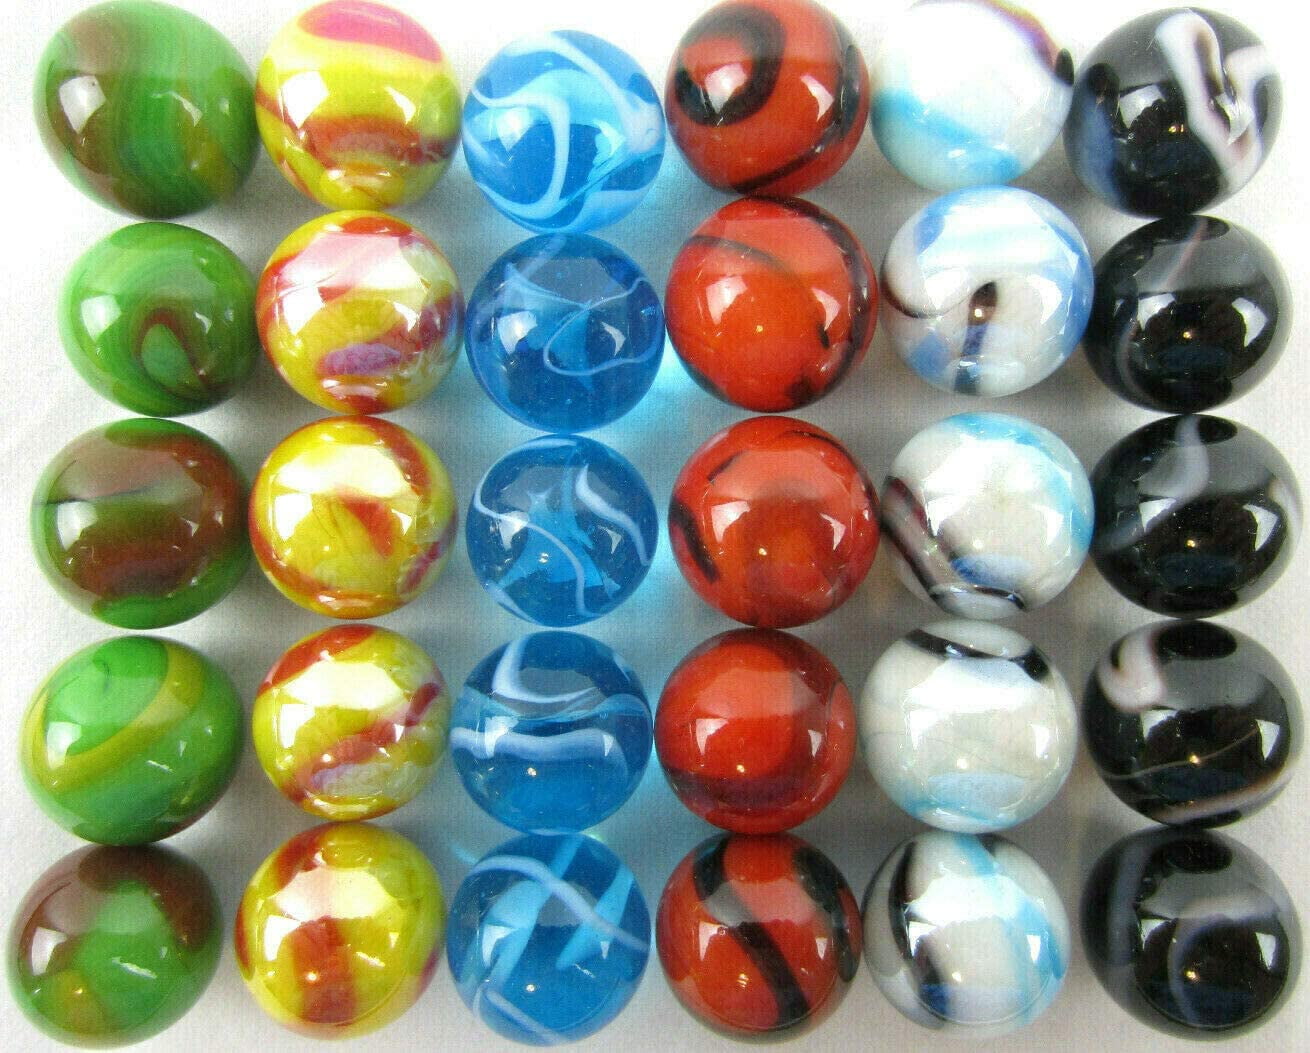 CHOCOLATE SWIRLS CHAMPION MARBLES FREE SHIPPING or MARBLE LOT 2 POUNDS OF 5/8" 